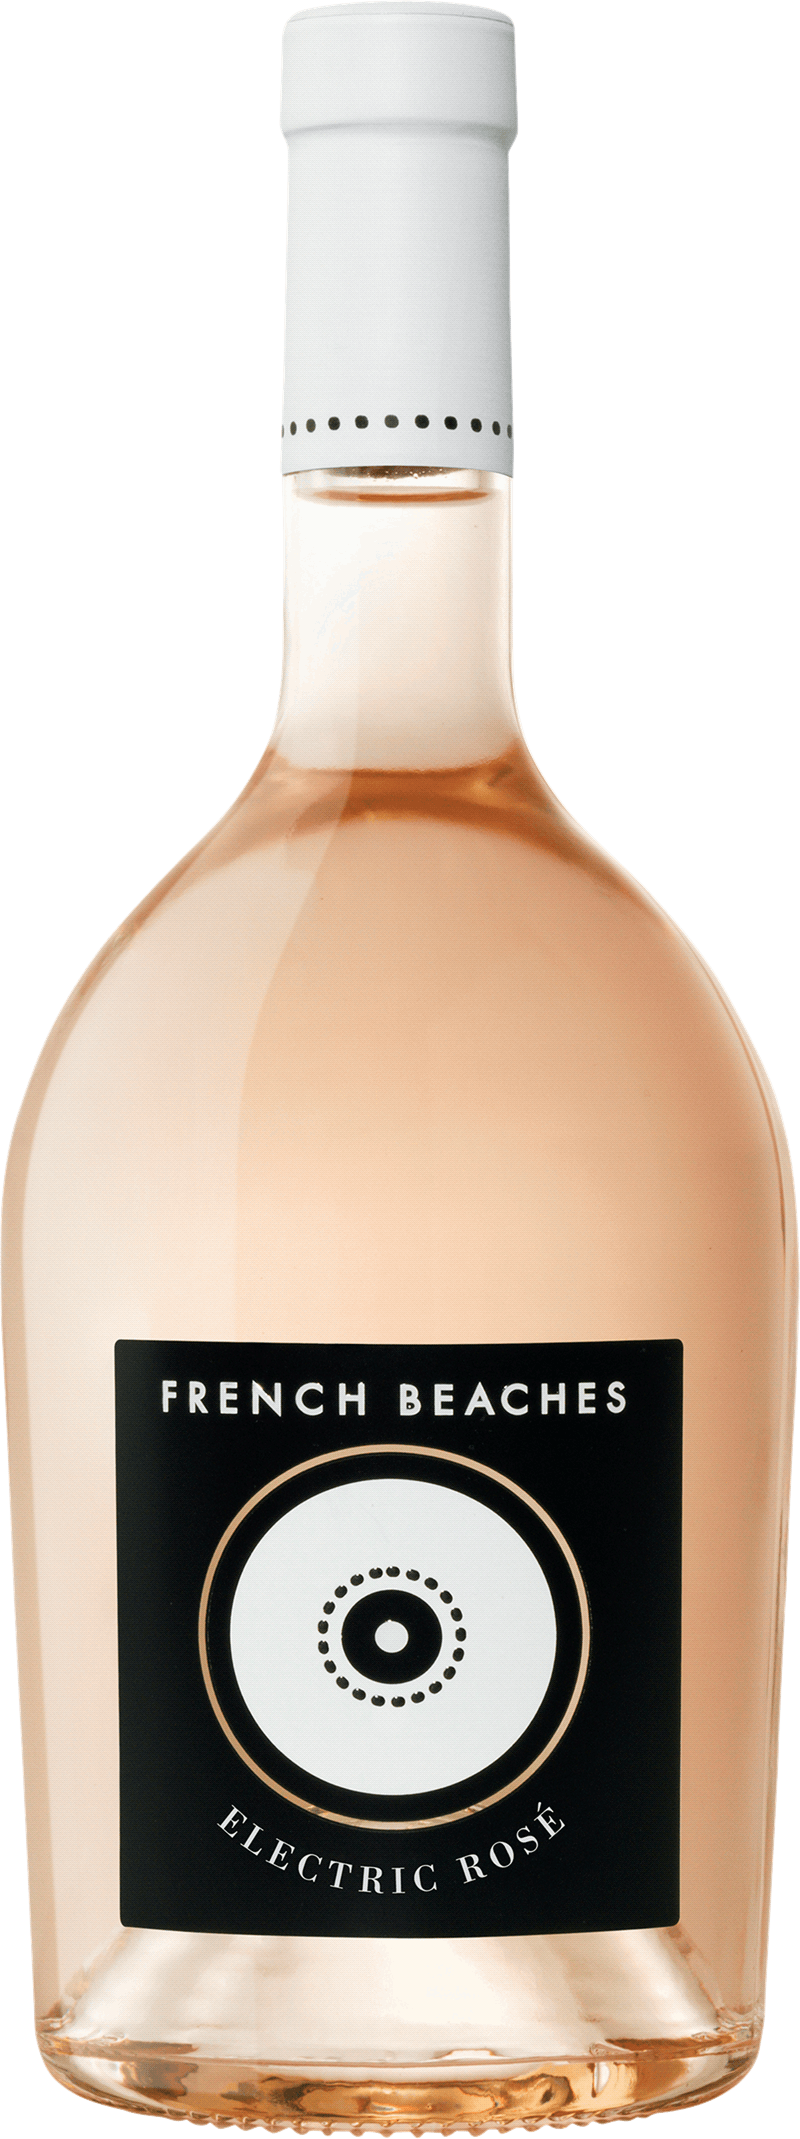 French Beaches Electric Rosé